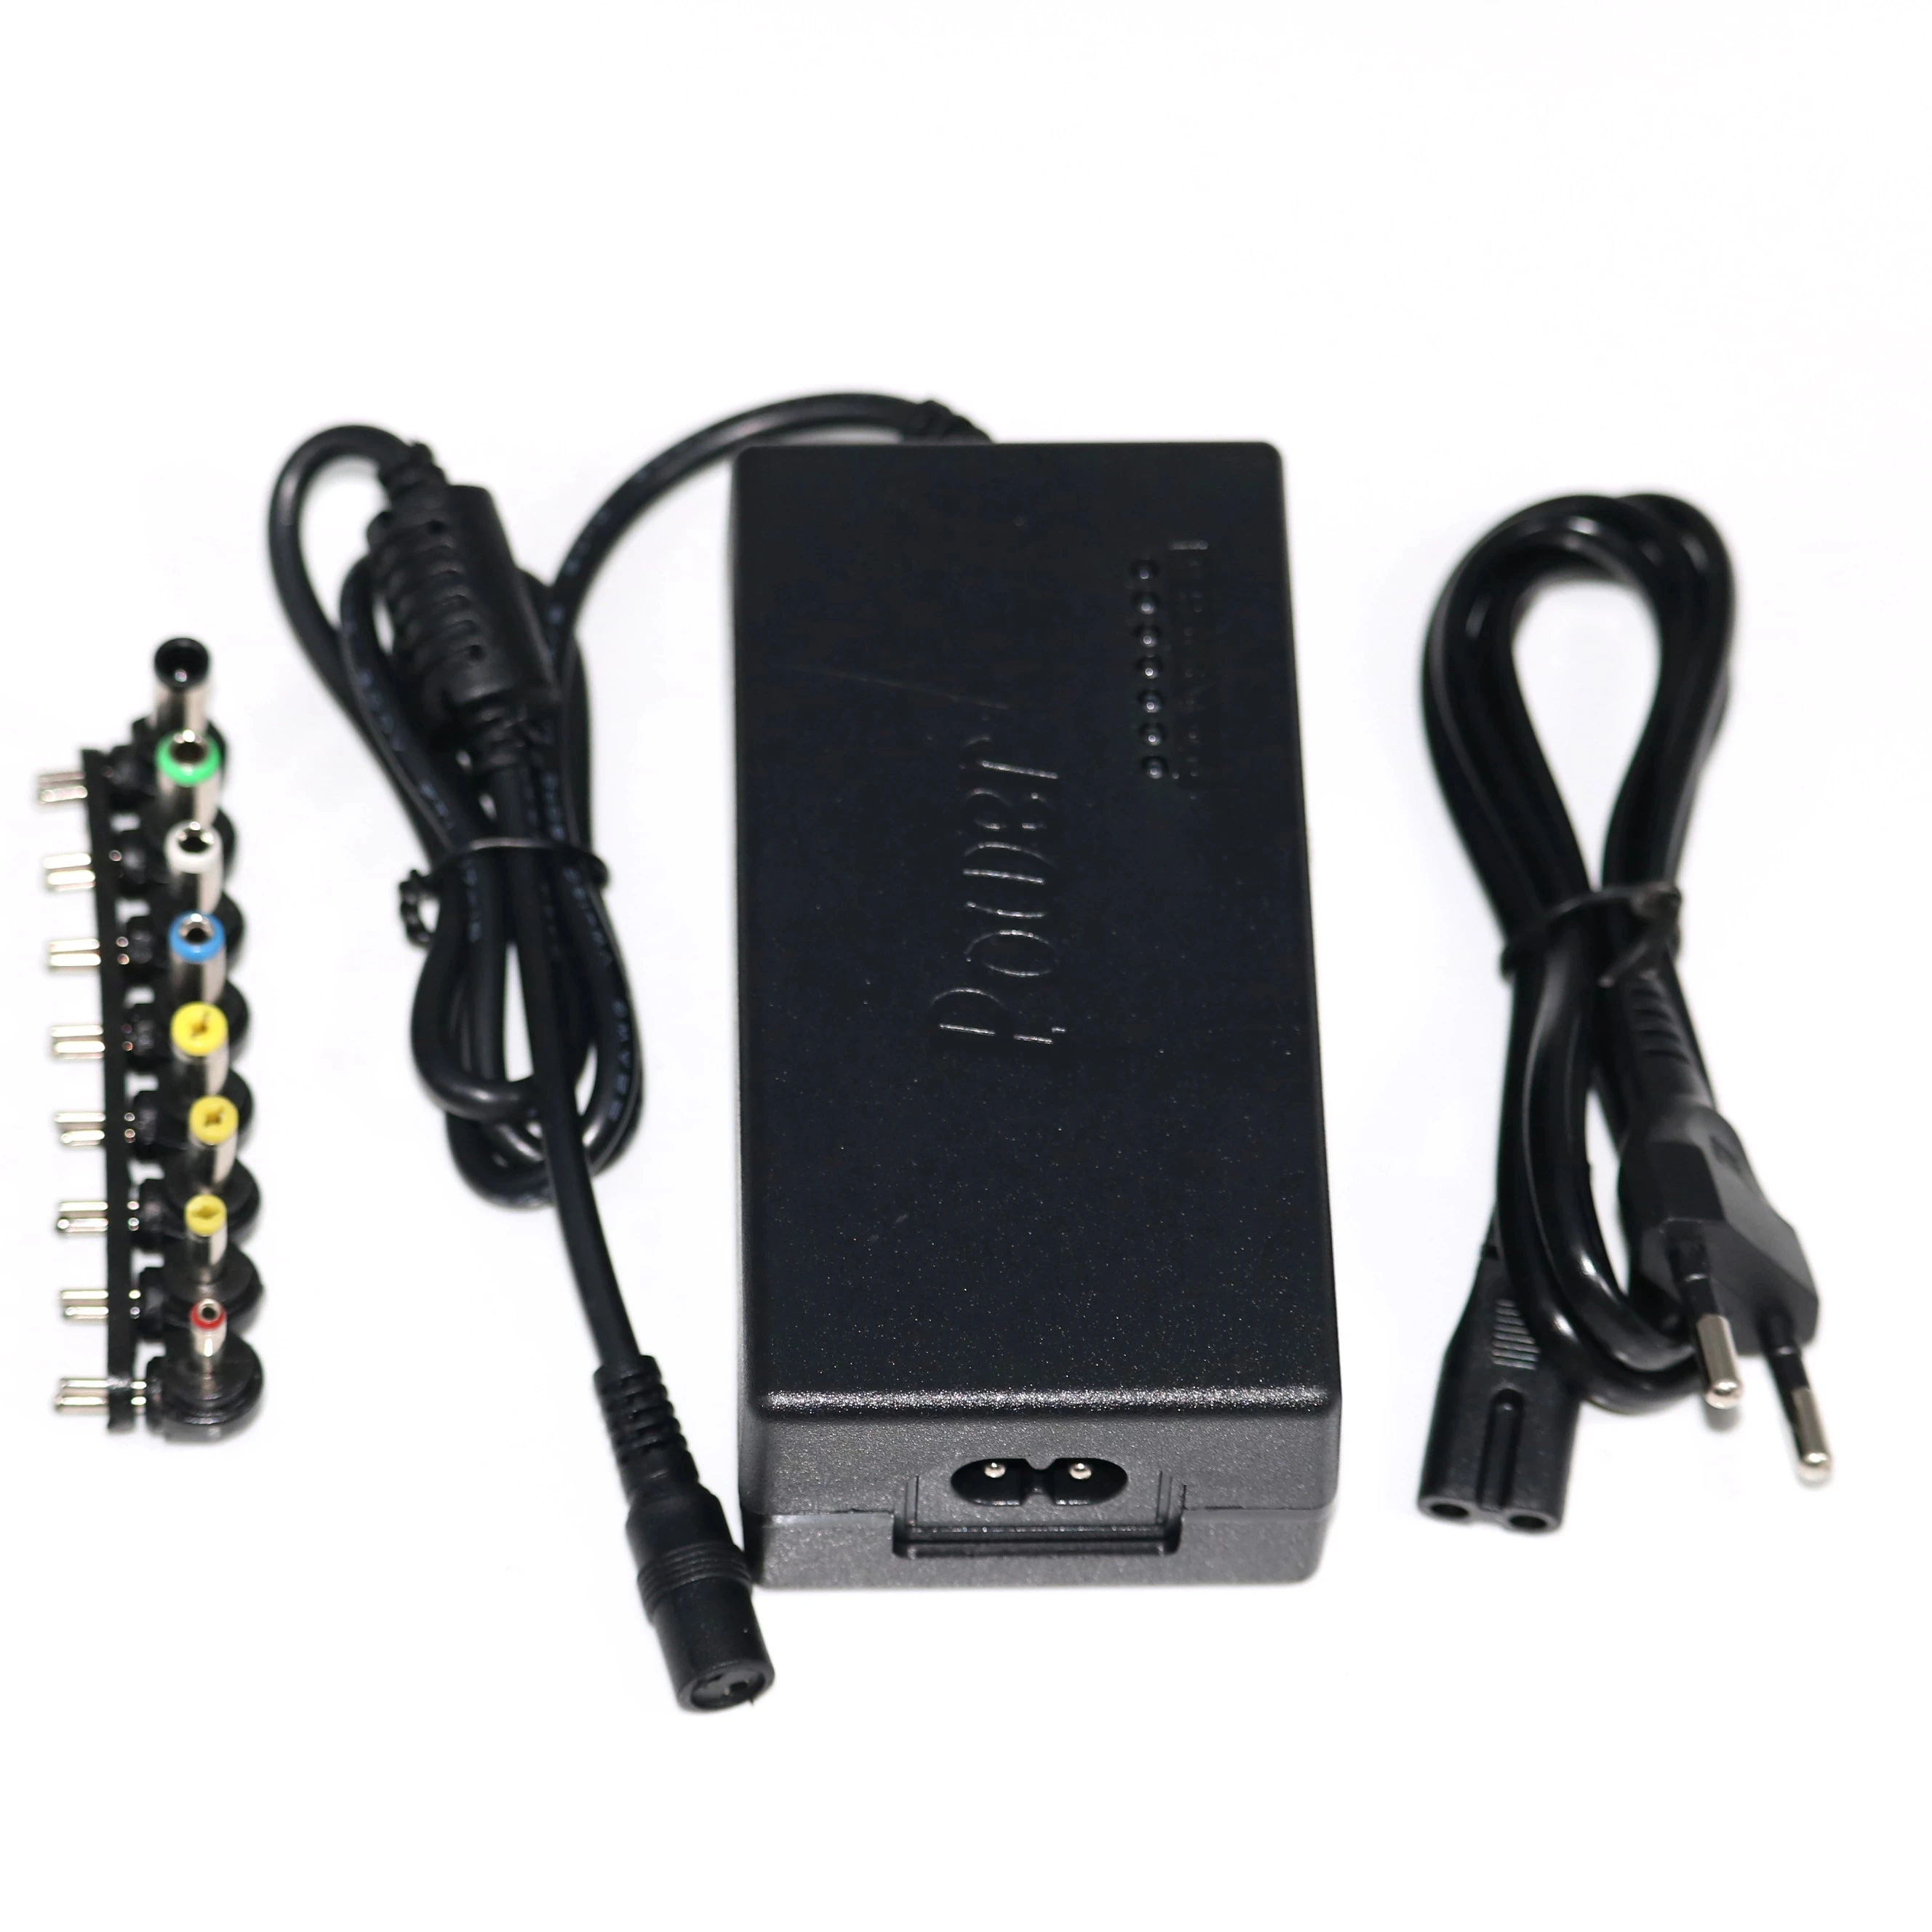 

19V 4.74A 90W Laptop AC Universal Power Adapter Charger for Acer ASUS DELL Thinkpad Lenovo Sony Toshiba Samsung Laptop